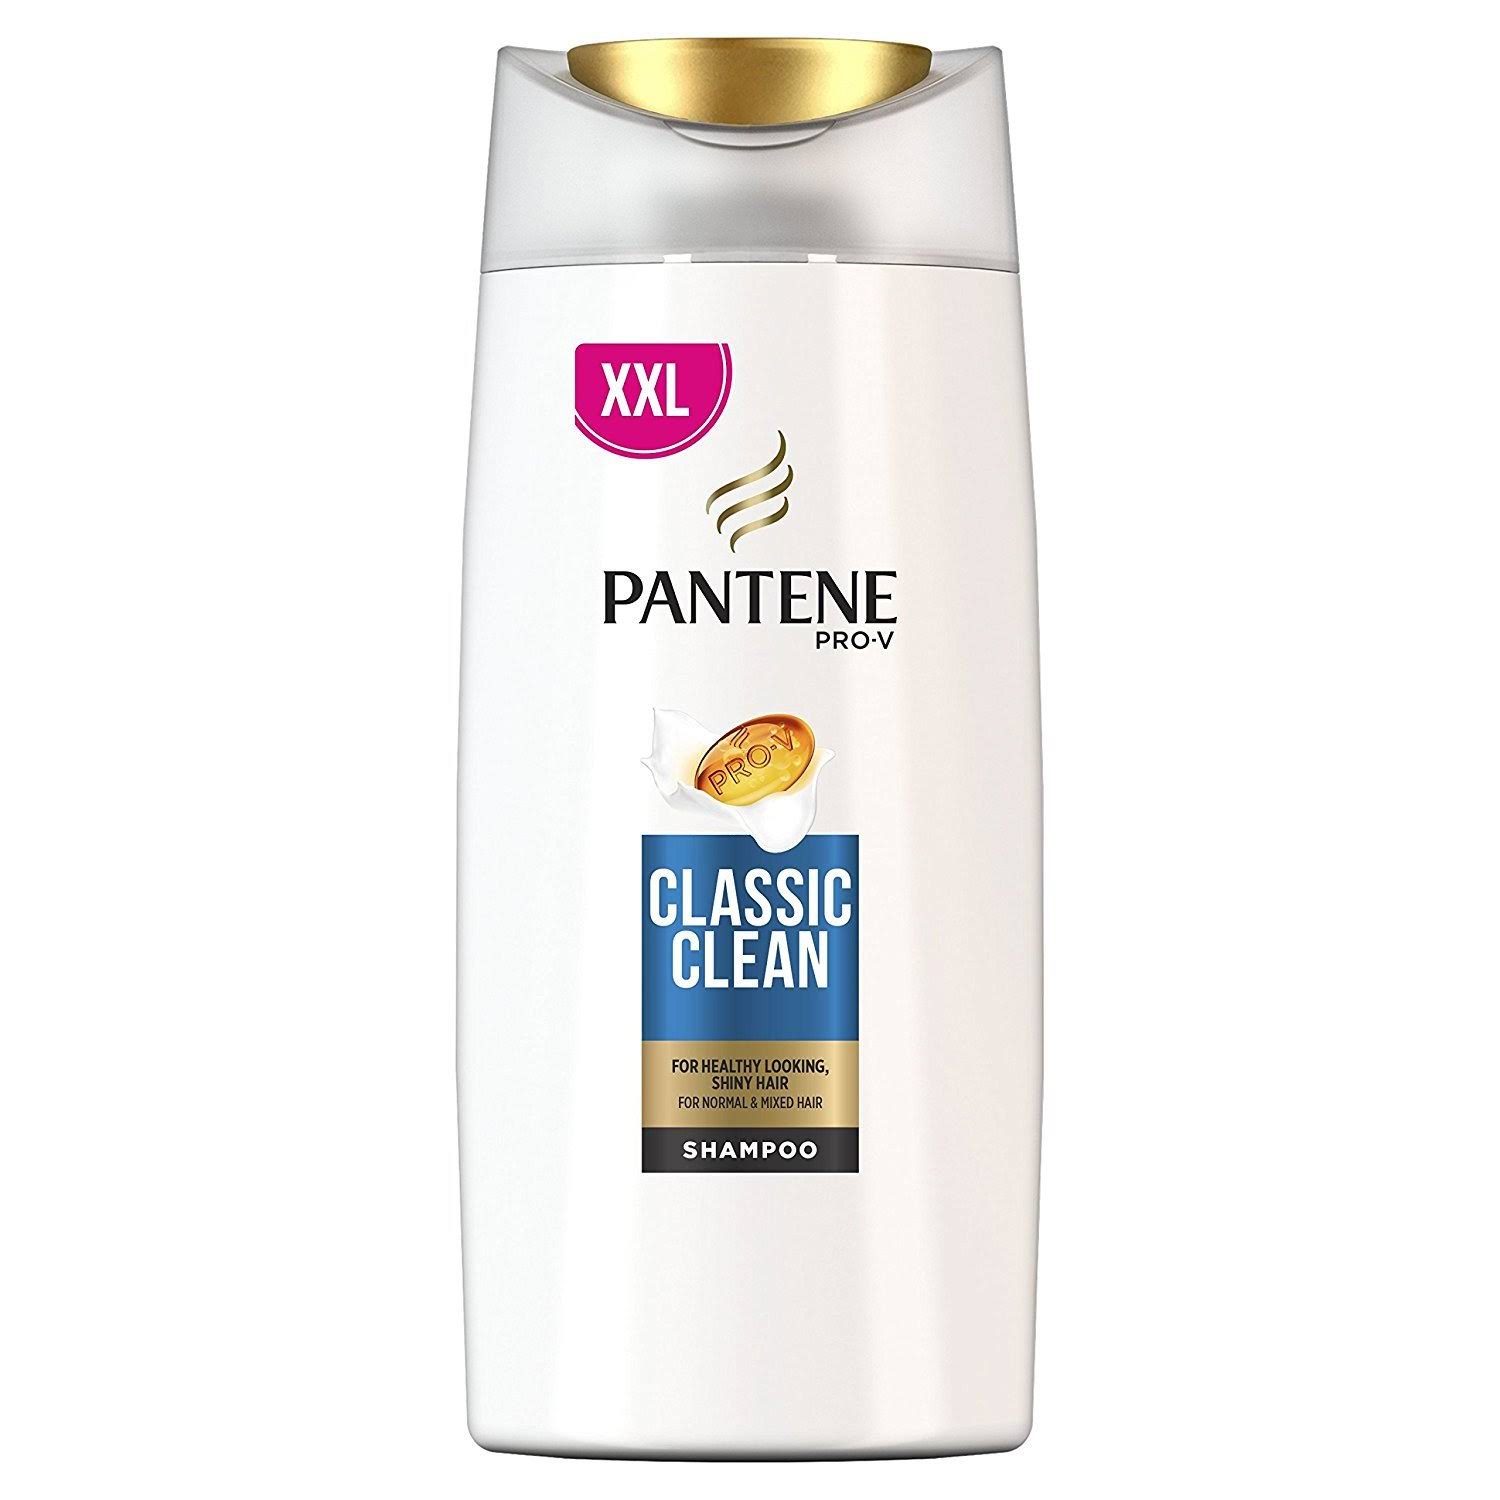 Pantene Pro-V Classic Clean Shampoo for Normal to Mixed Hair - 700ml